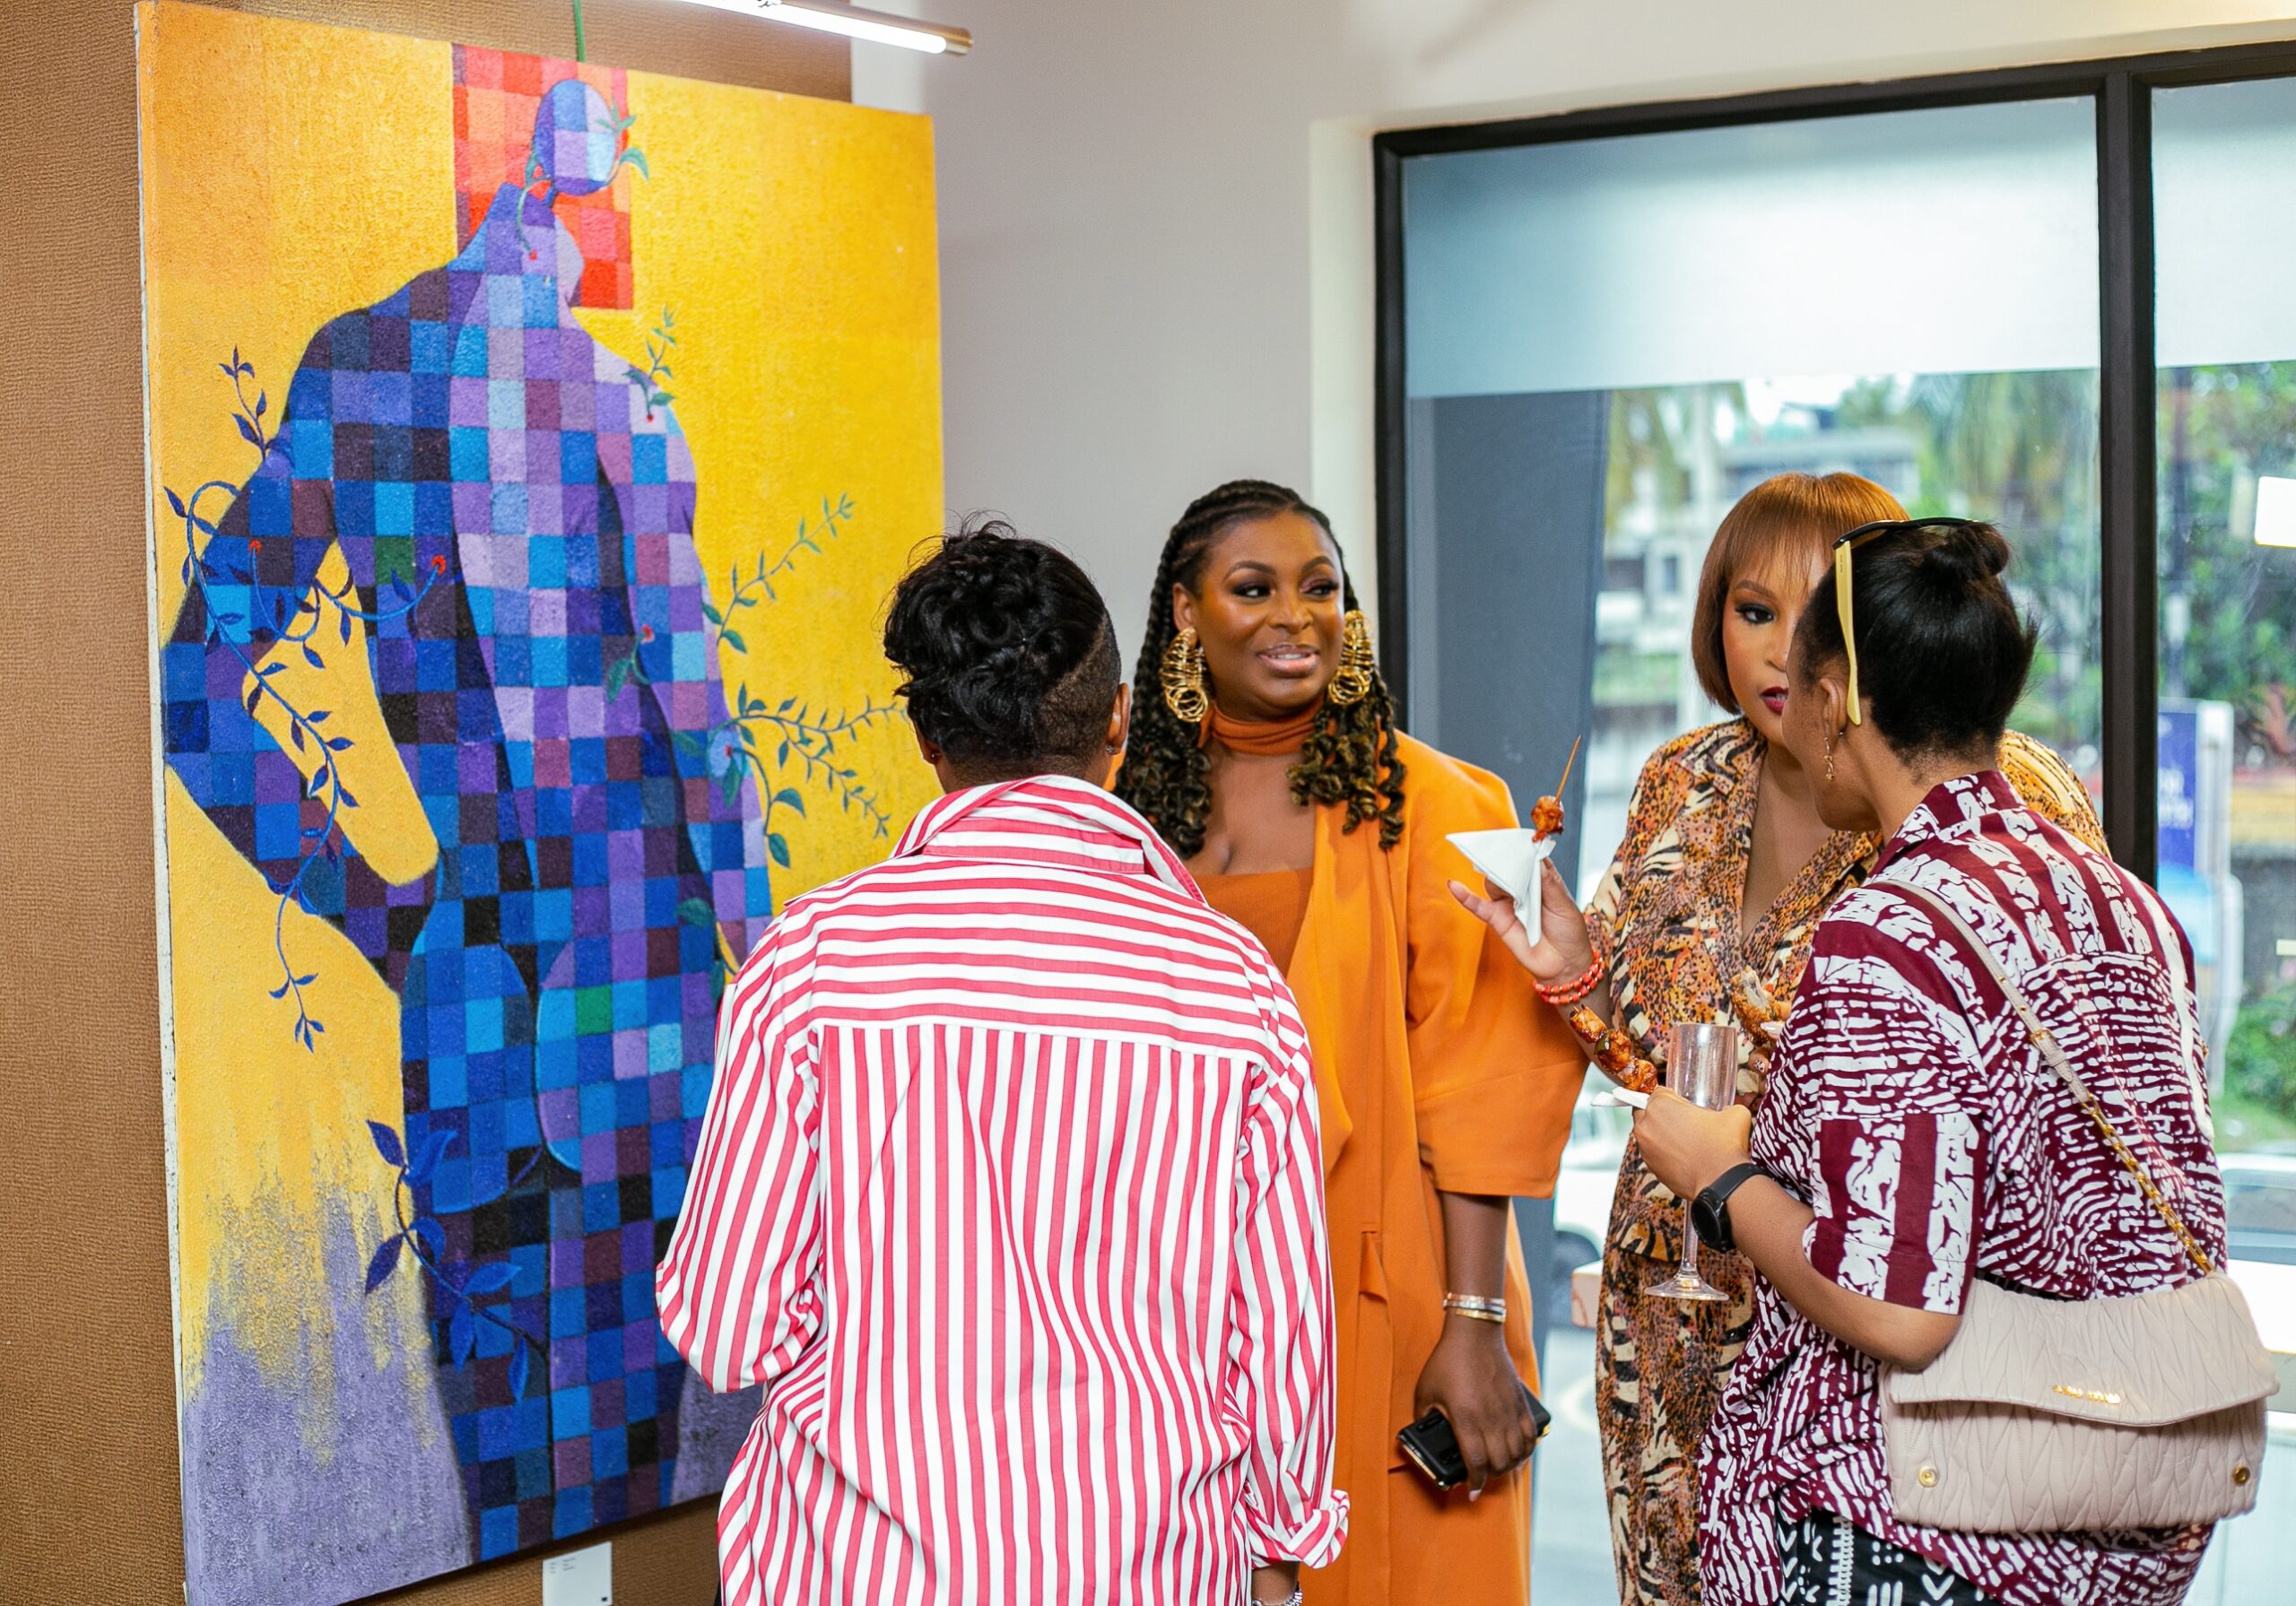 Folakemi Oloye and Other guest during the Teal Clture Art Salon